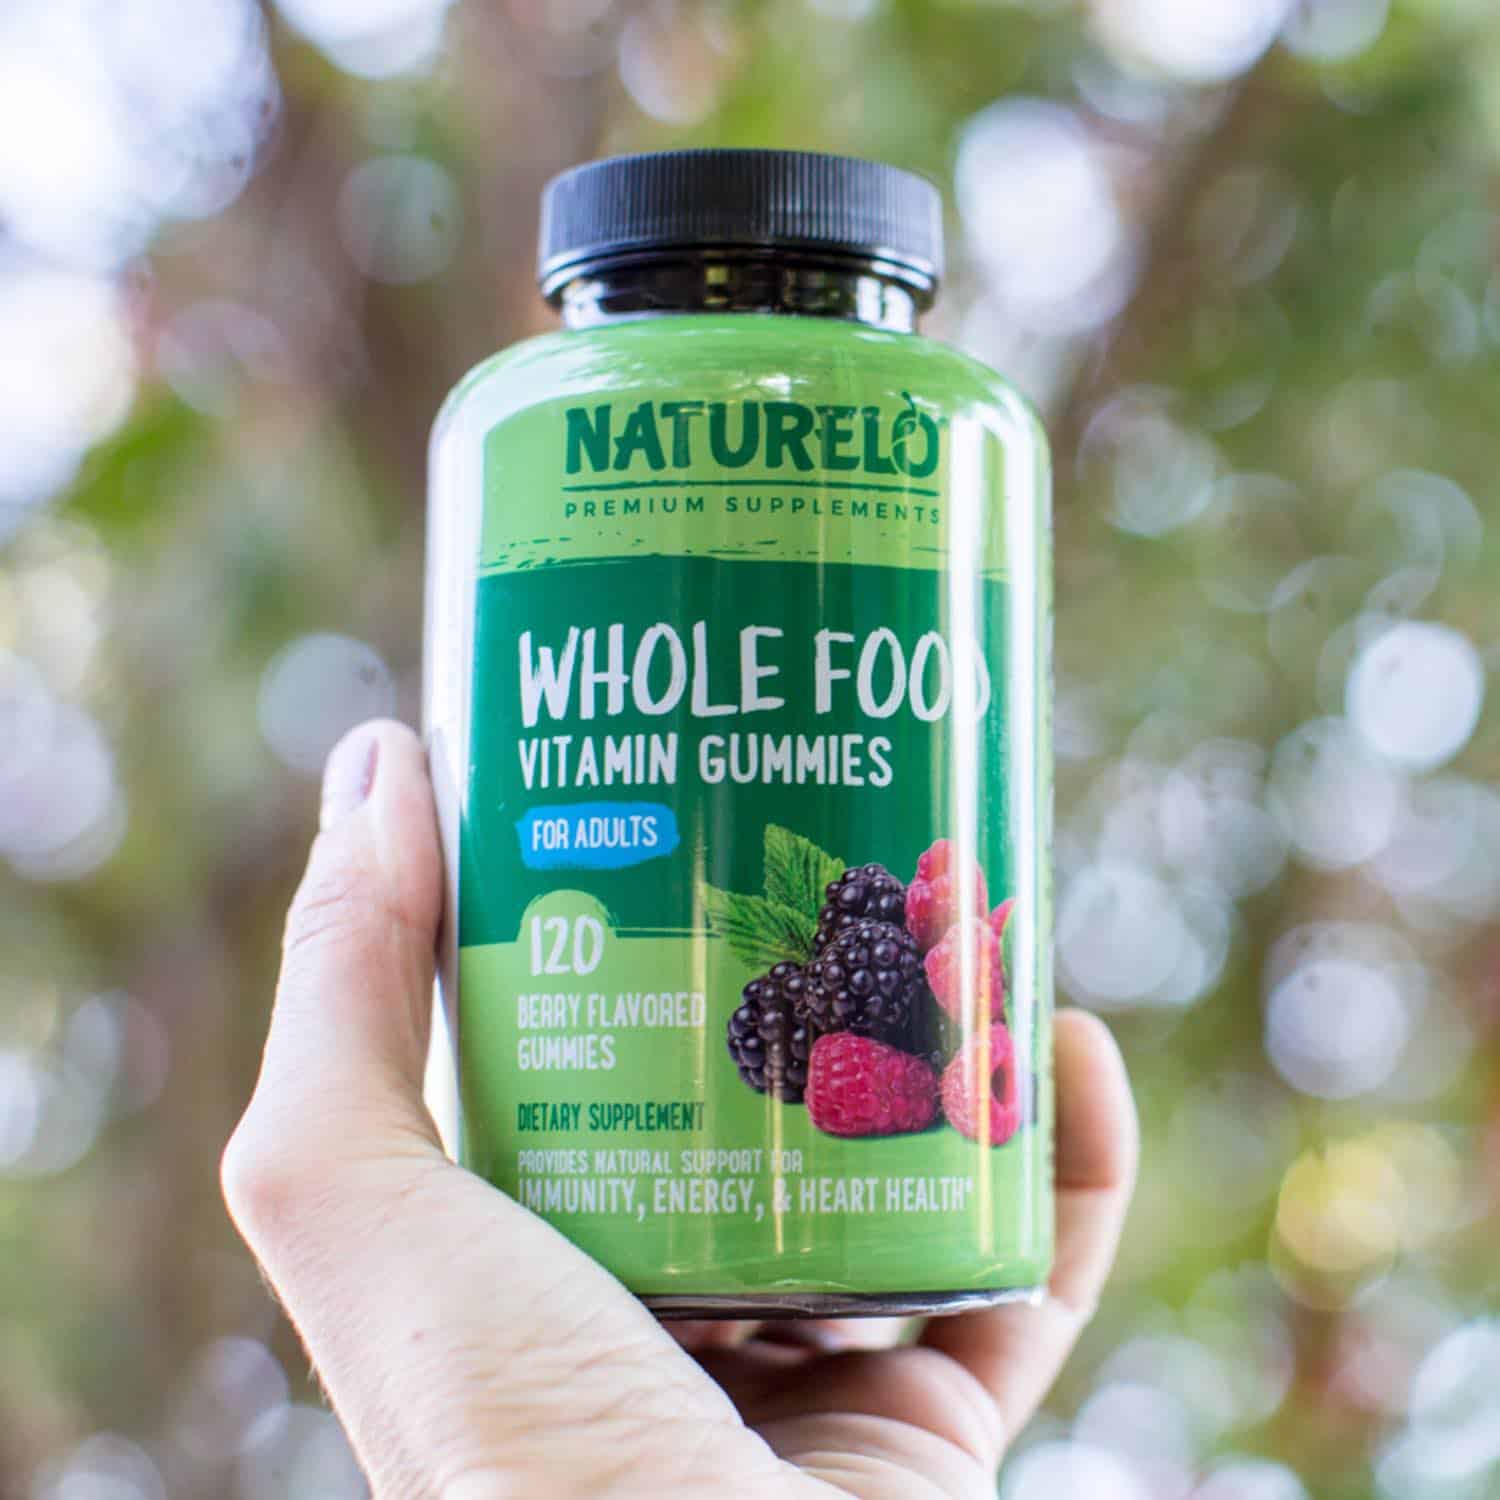 vegan whole food gummy vitamins from naturelo for adults